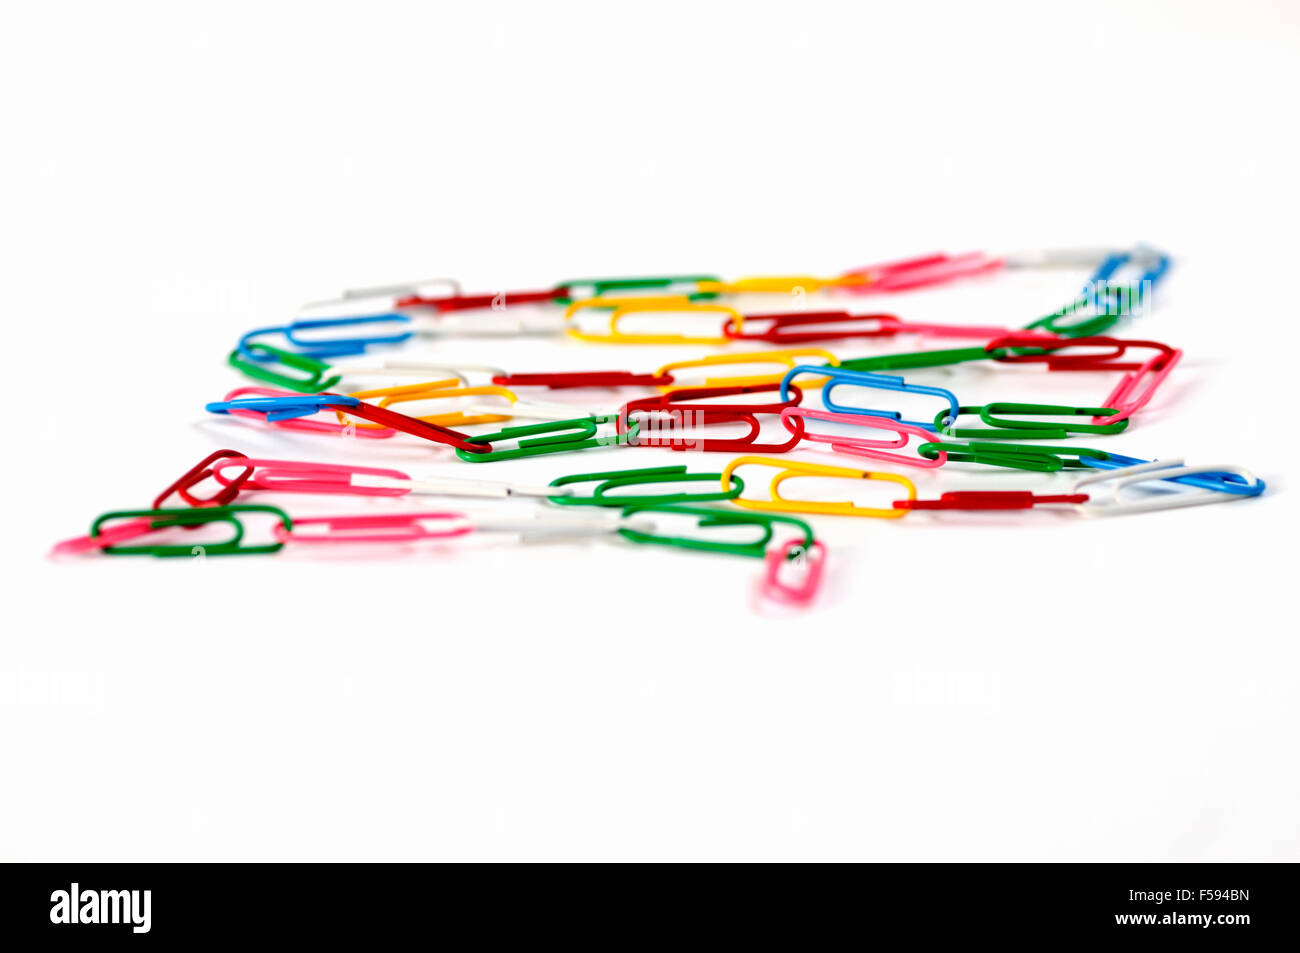 Coloured paper clips on white background Stock Photo